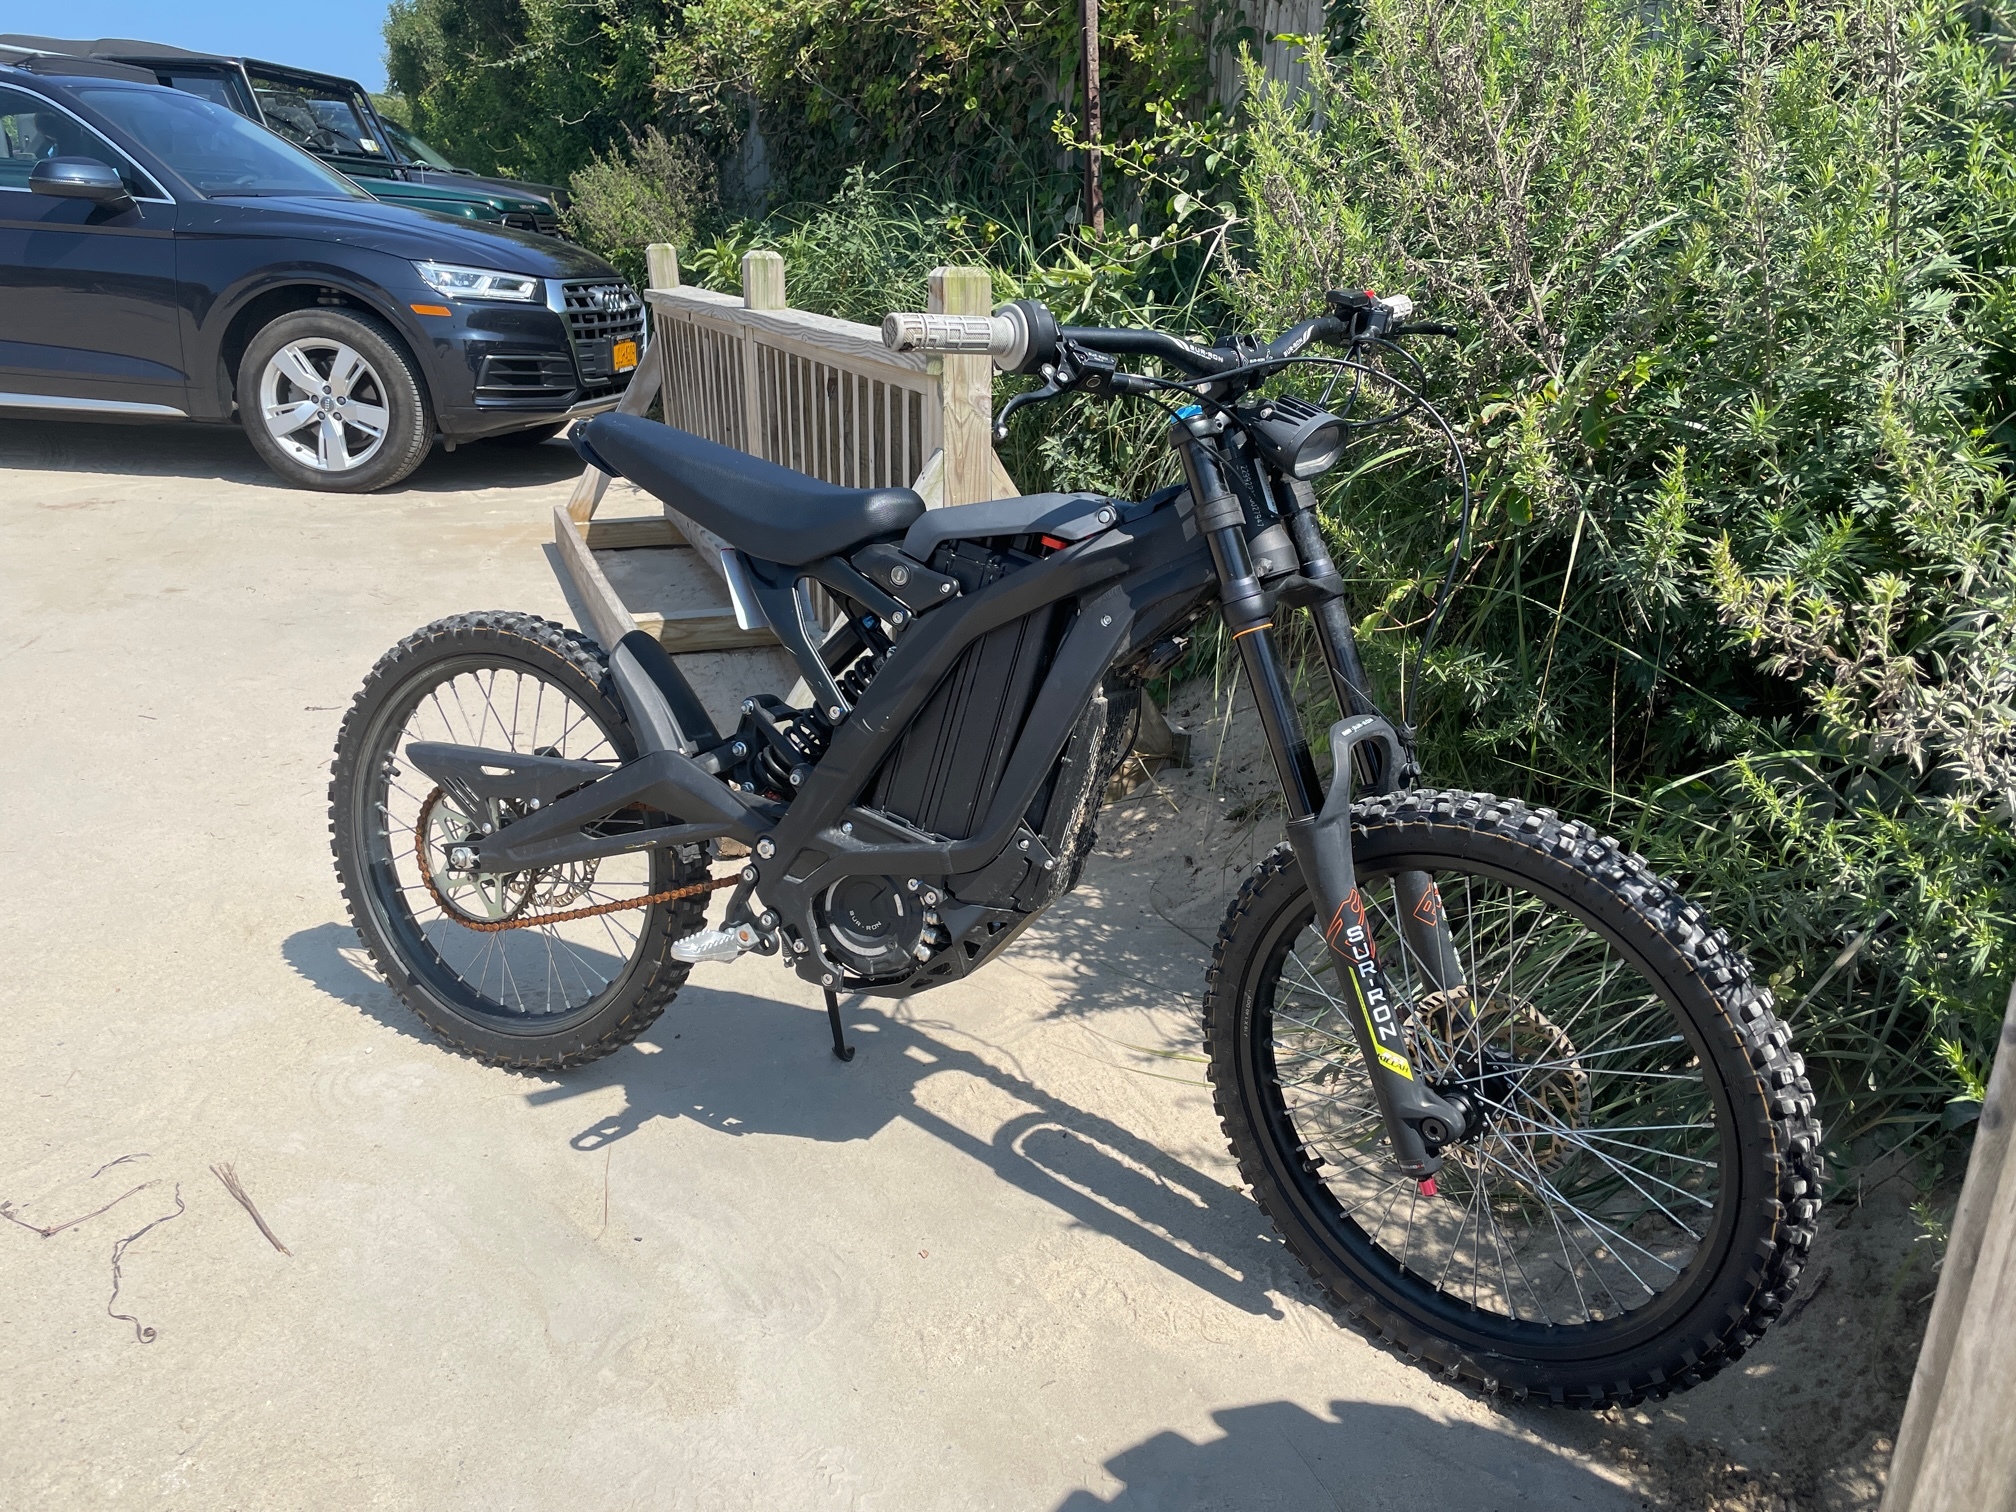 This Surron X e-bike has no pedals and is classified as a motor vehicle, meaning it needs to be registered and the rider must wear a helmet. It can go up to 40 miles per hours.